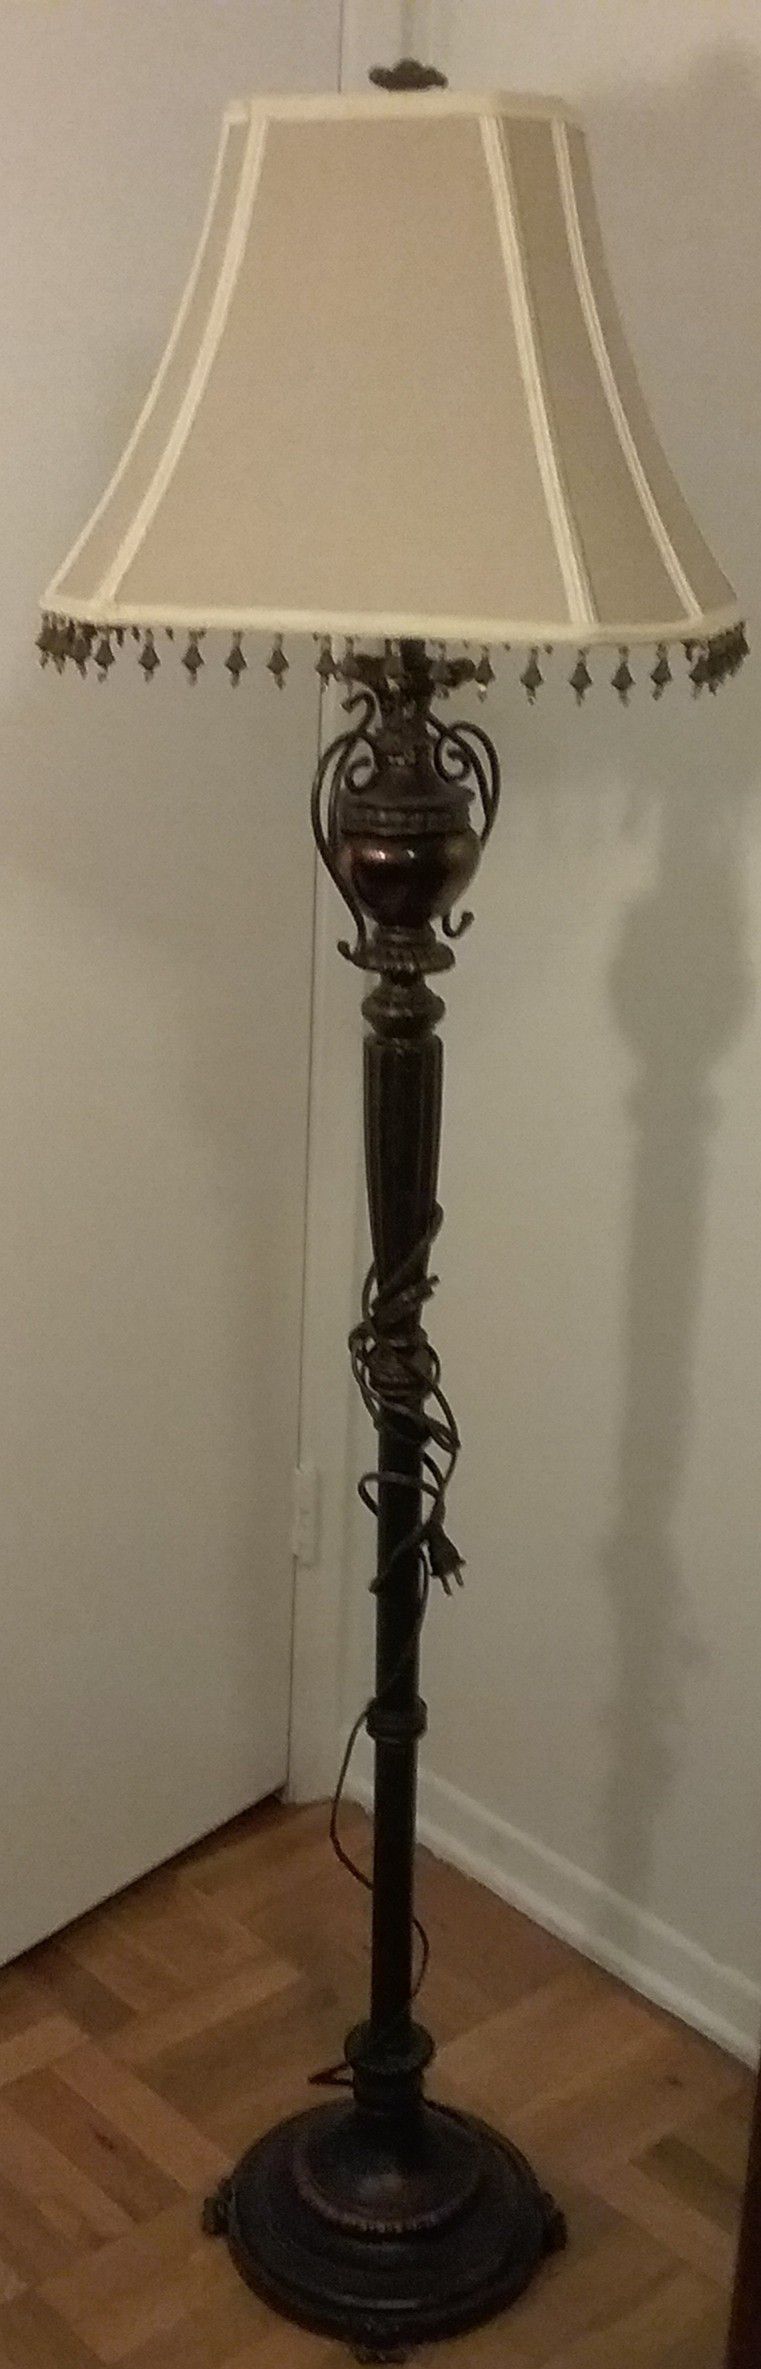 Lamp , antique look, 61 H, clean, use condition, make a offer,